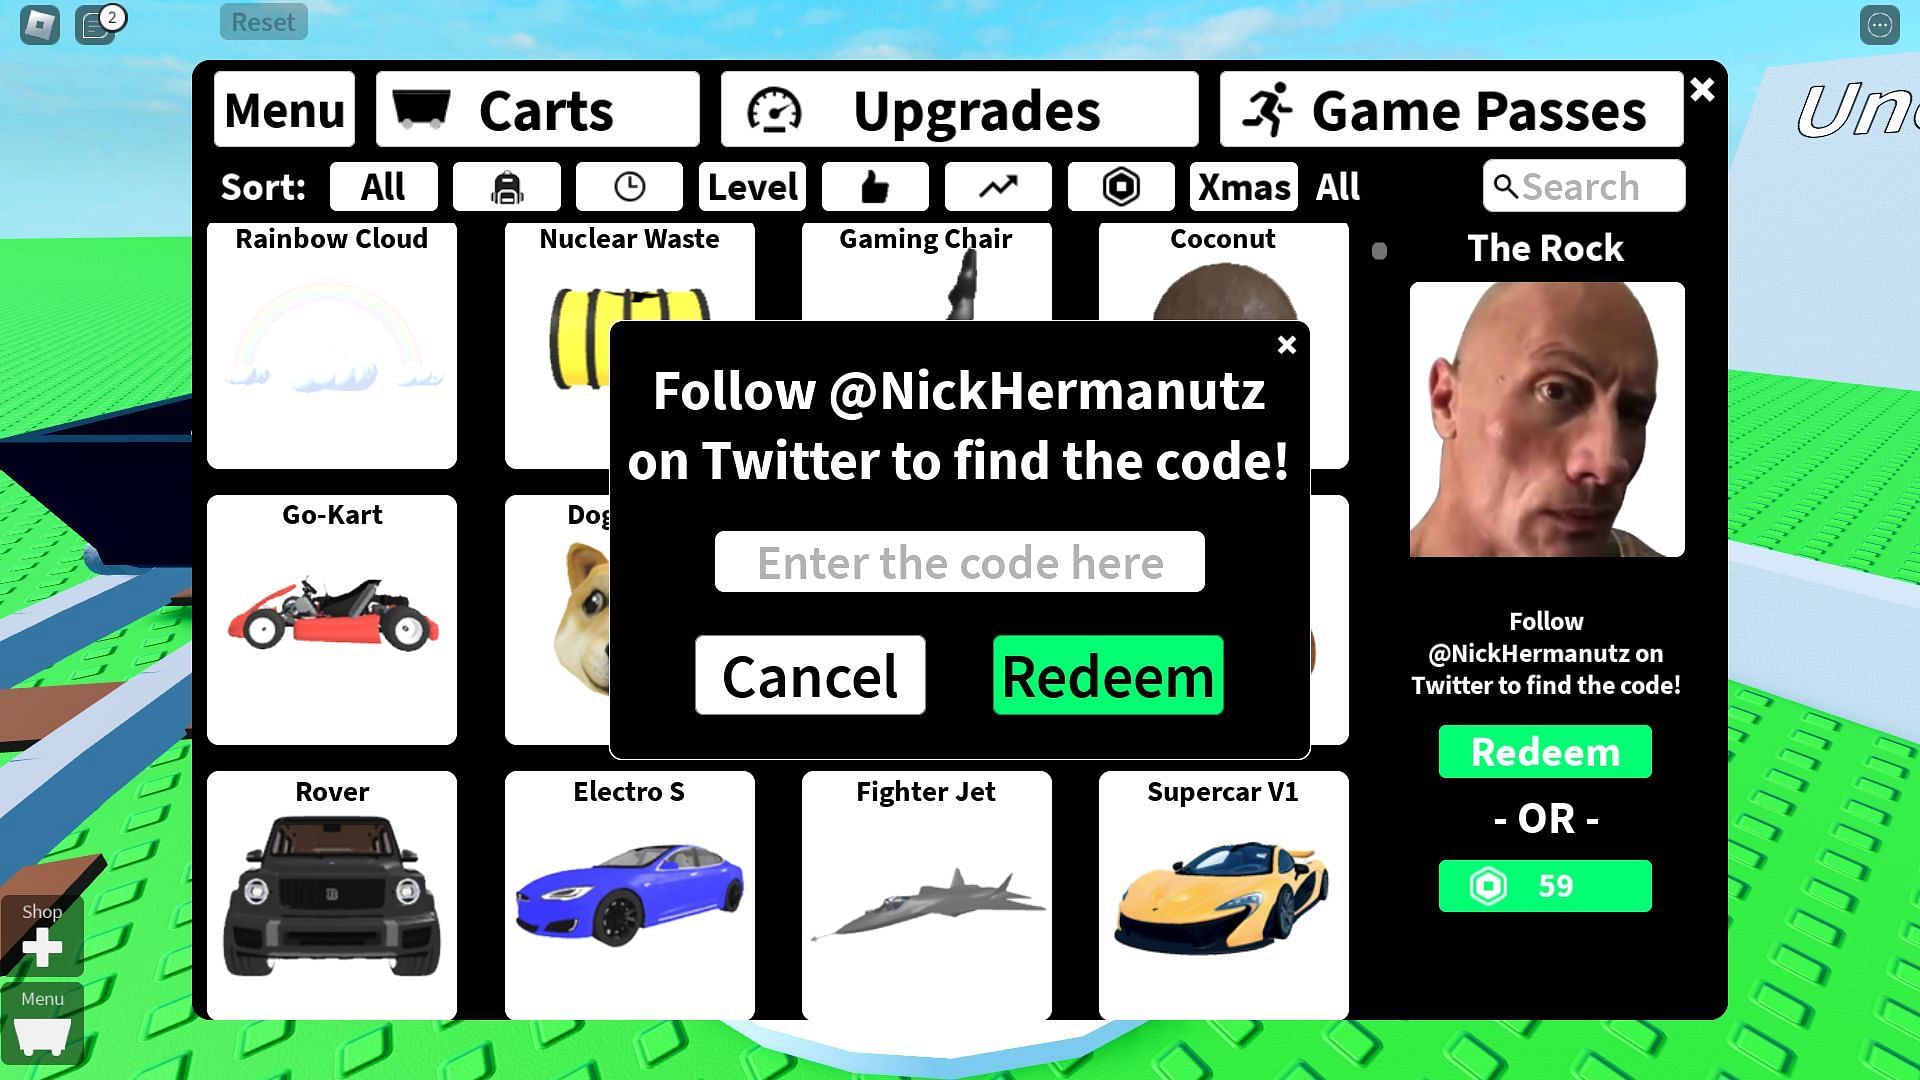 Active codes for Create a Cart Ride (Image via Roblox)